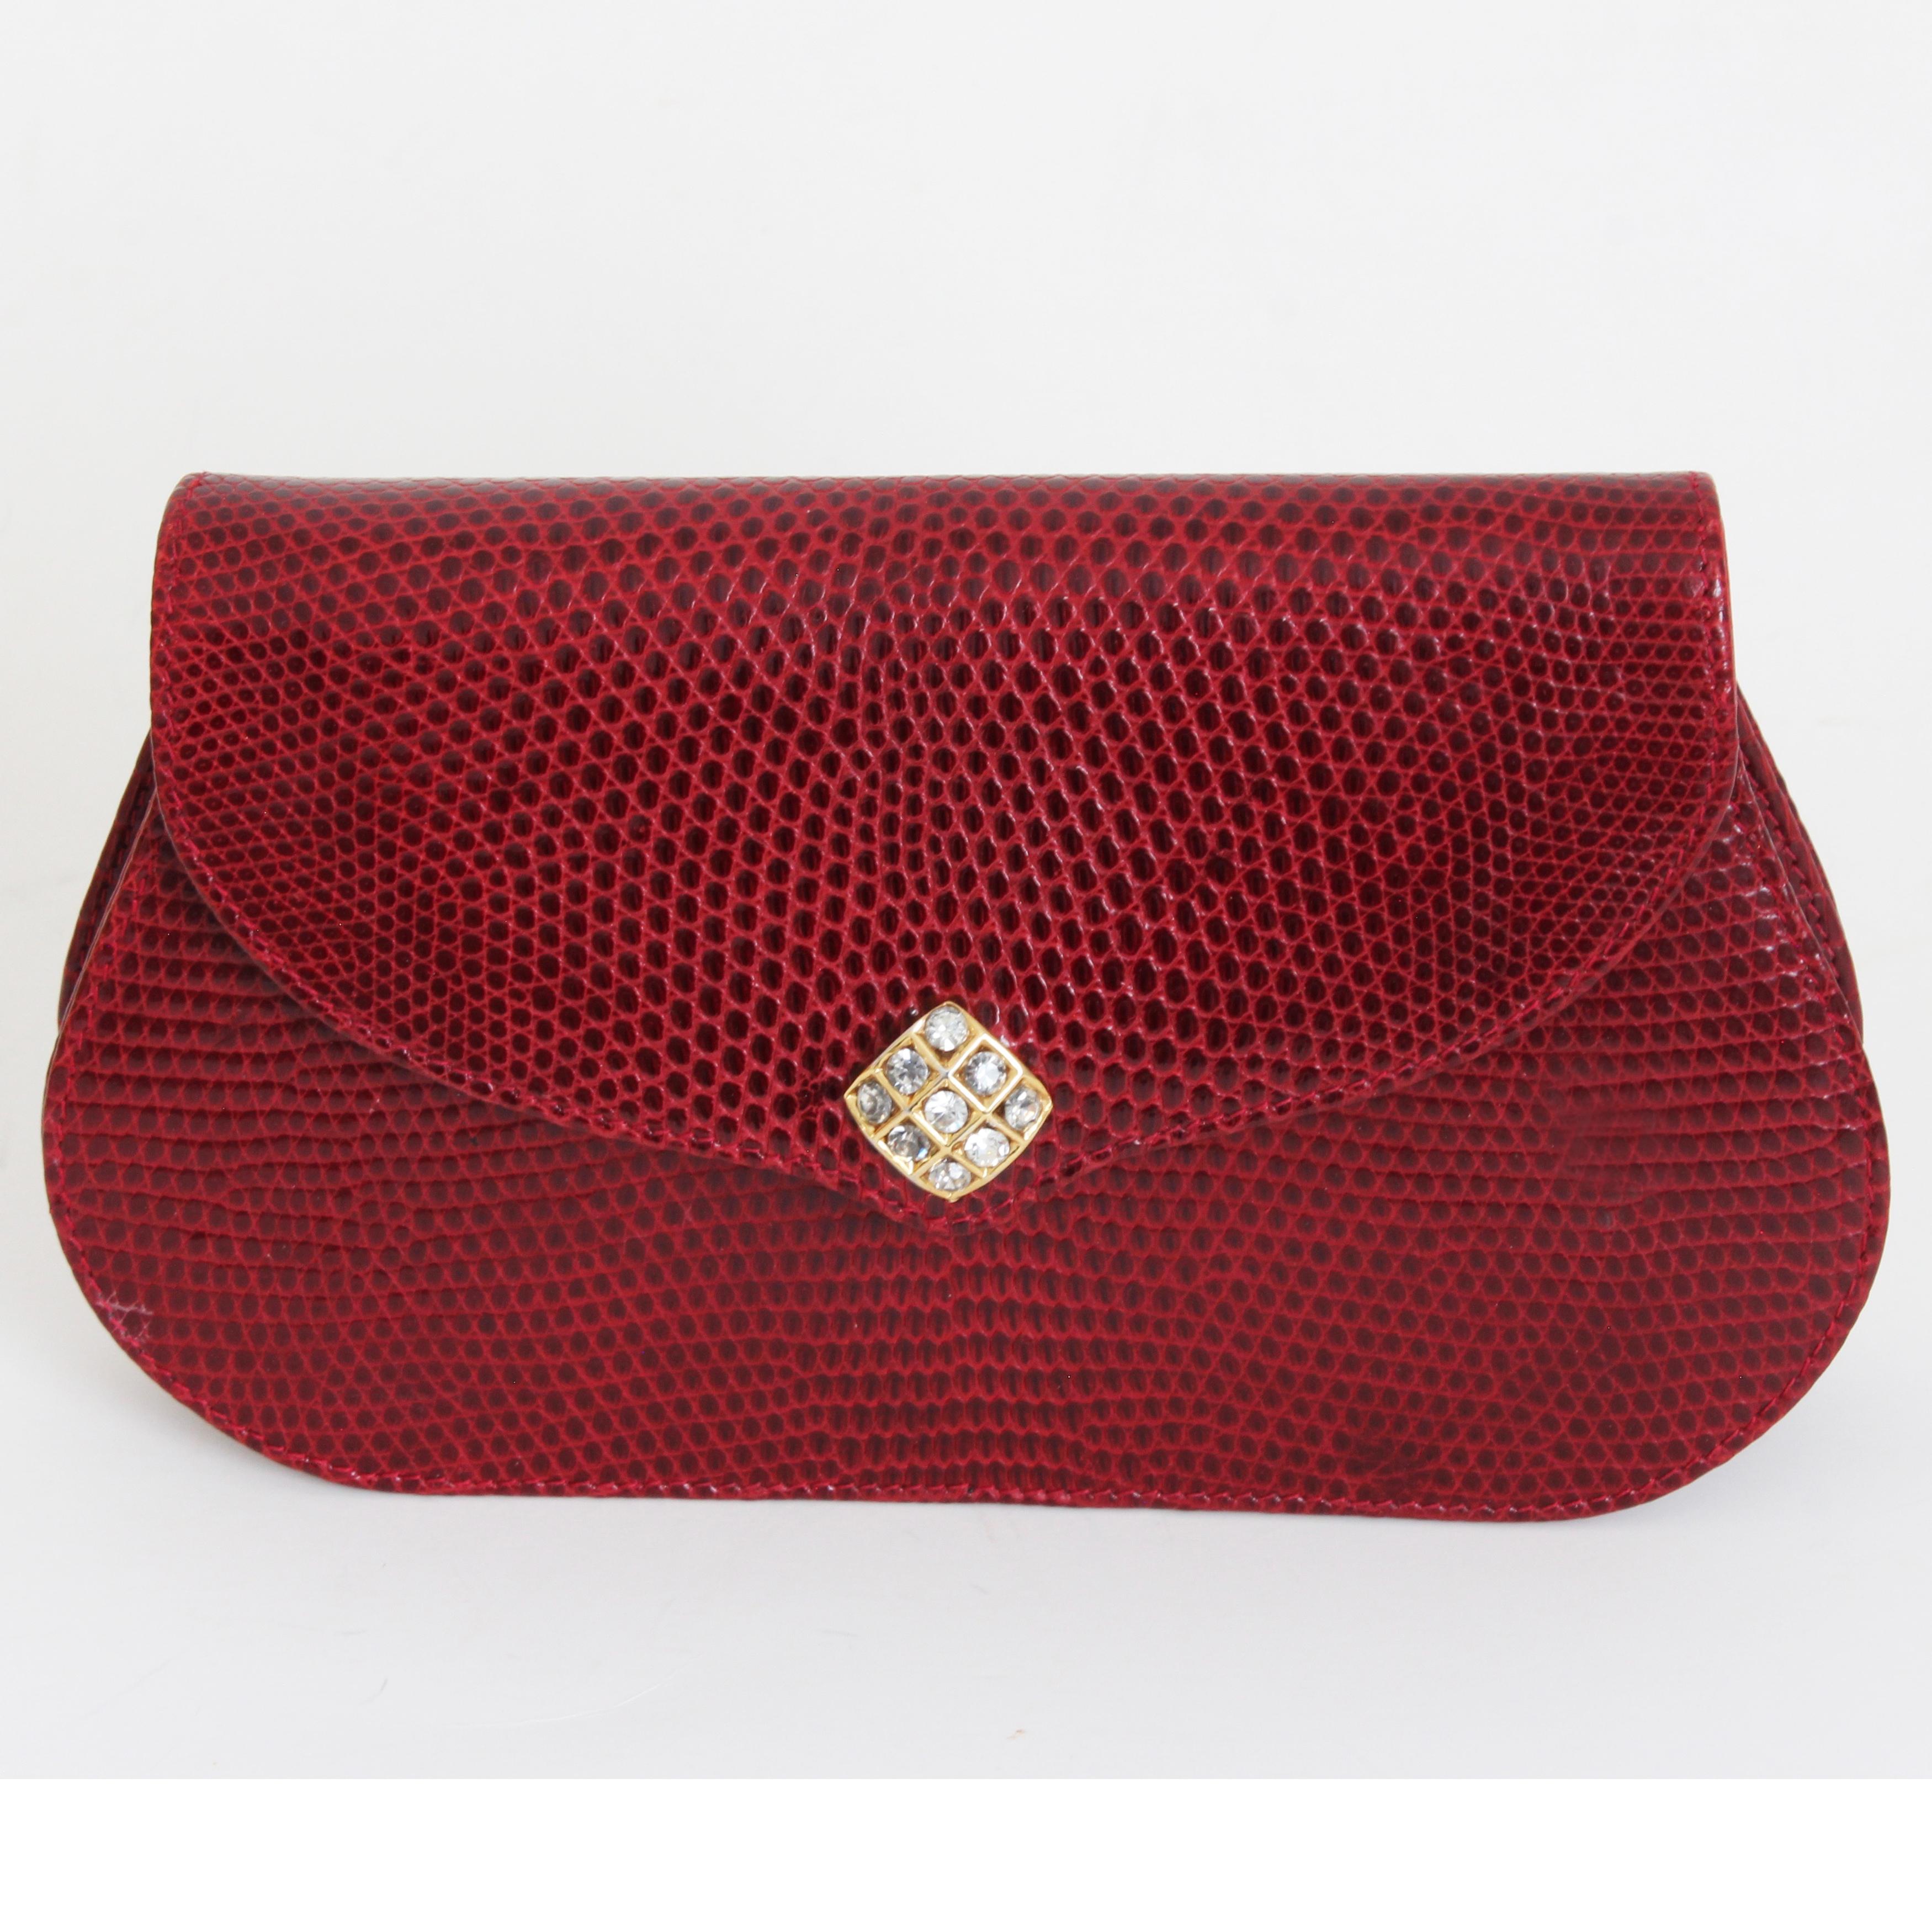 Lana of London Evening Bag Red Lizard Clutch with Chain  1